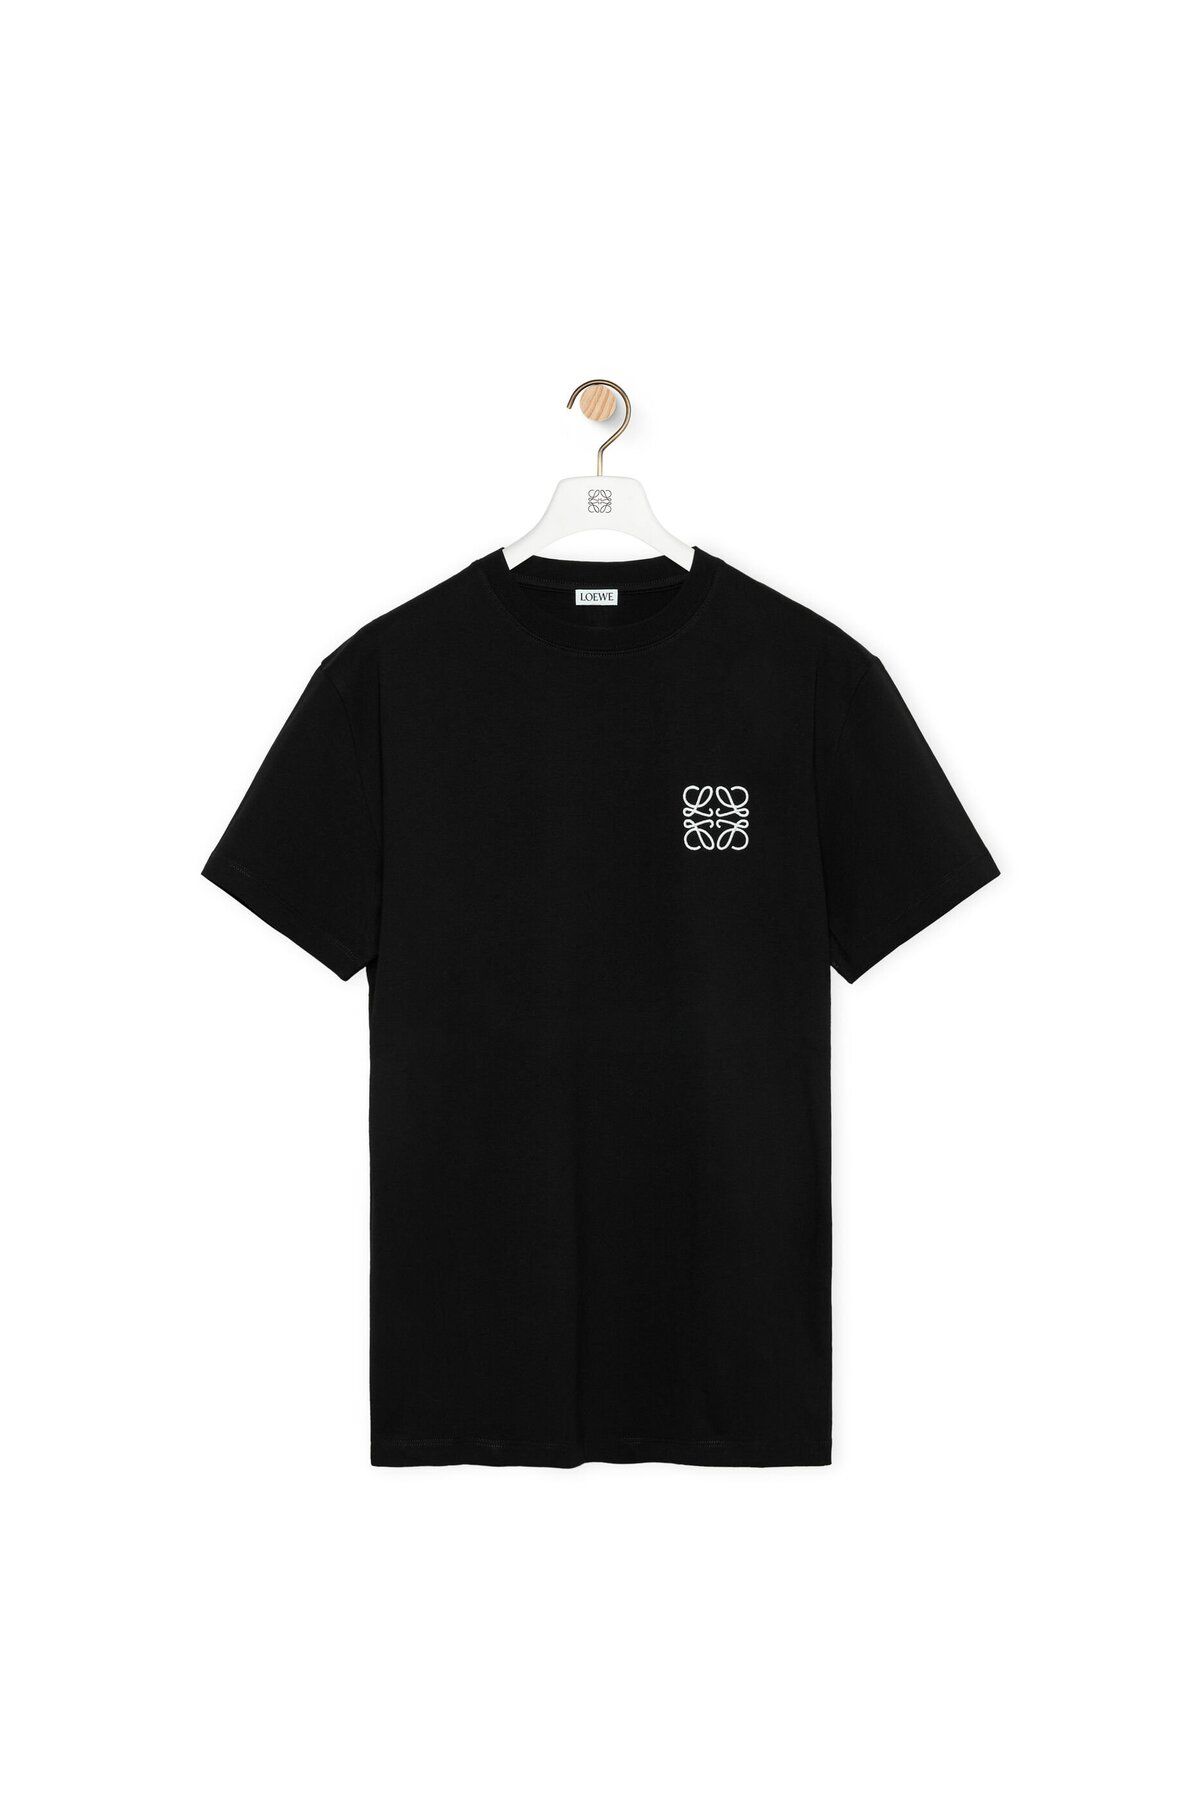 Loewe Anagram Embroidered Cotton Jersey T-Shirt